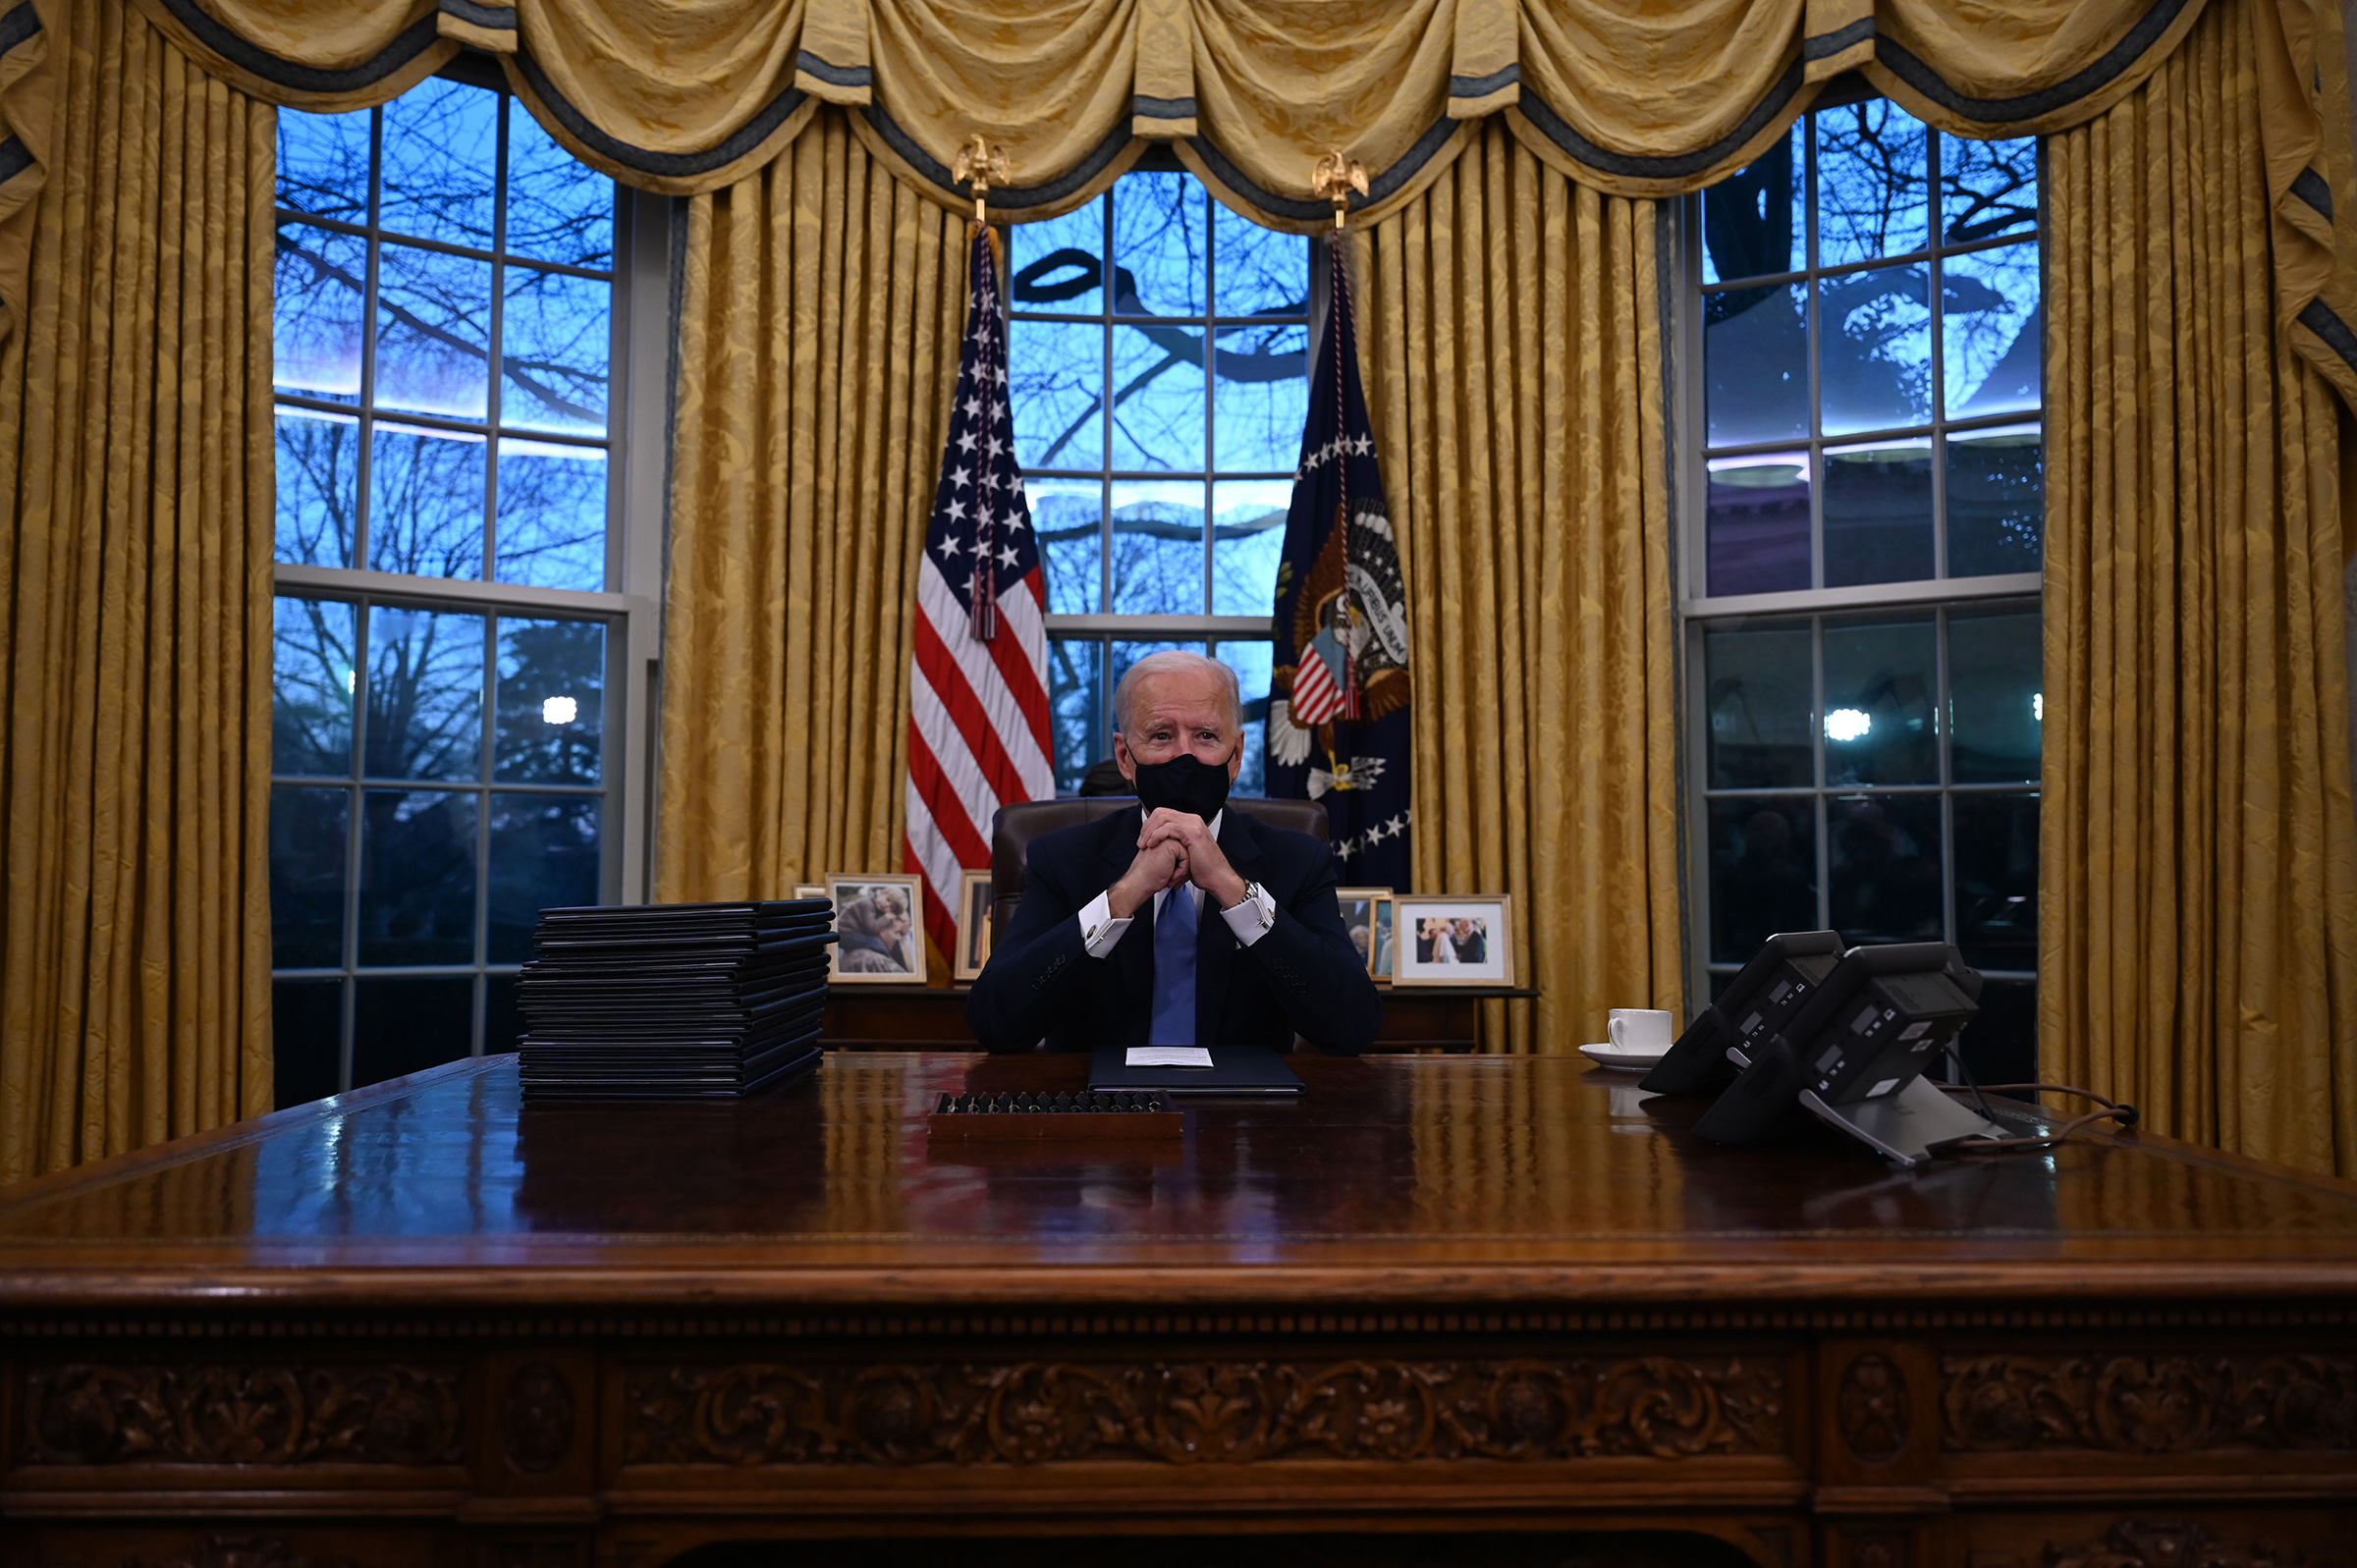 President Joe Biden sits in the Oval Office at the White House, after being sworn in.